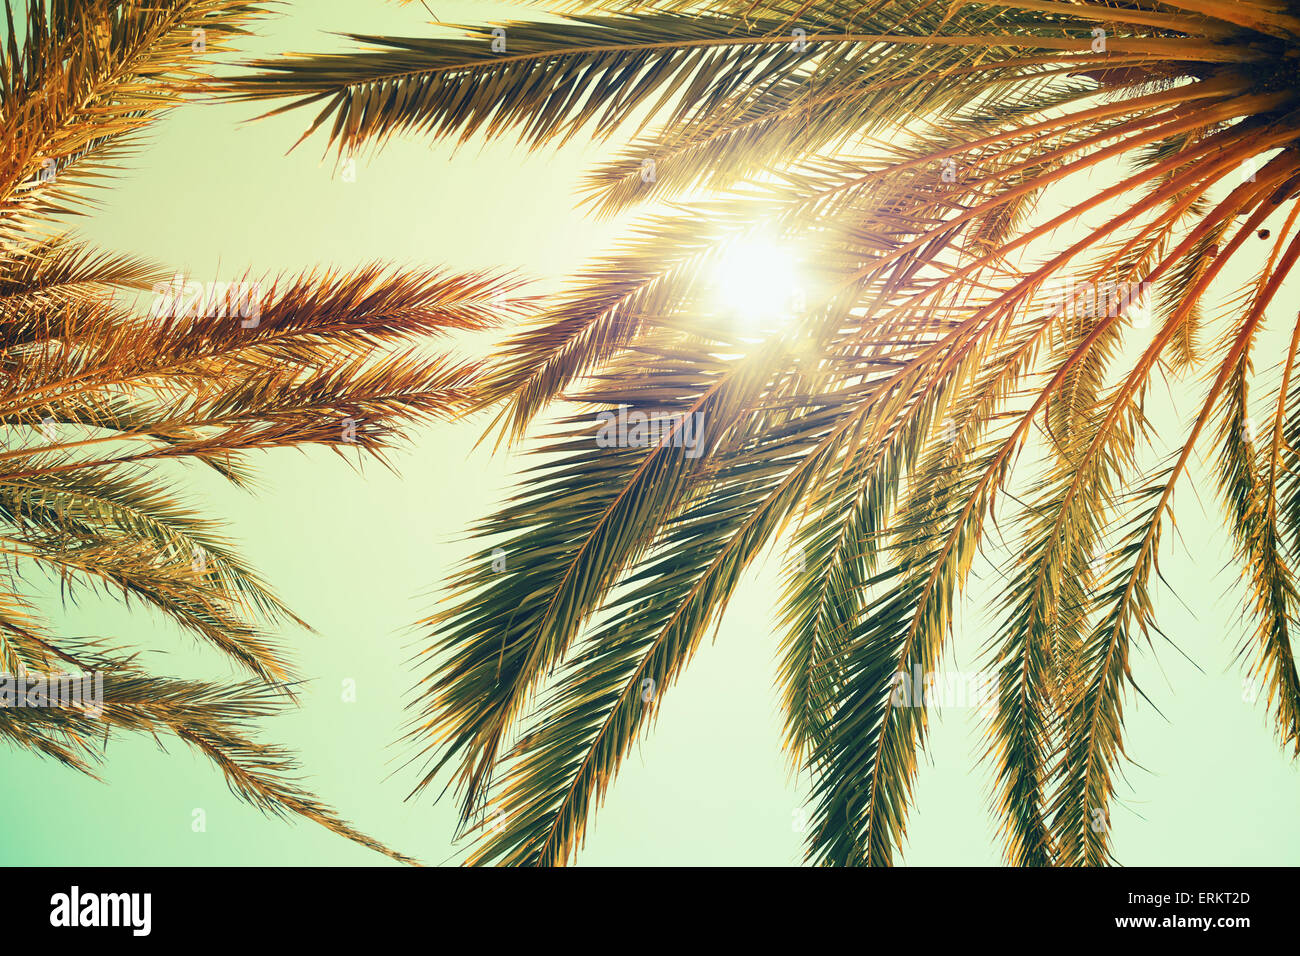 Palm trees and shining sun over bright sky background. Vintage style. Toned photo with vintage colorful tonal filter effect, ins Stock Photo